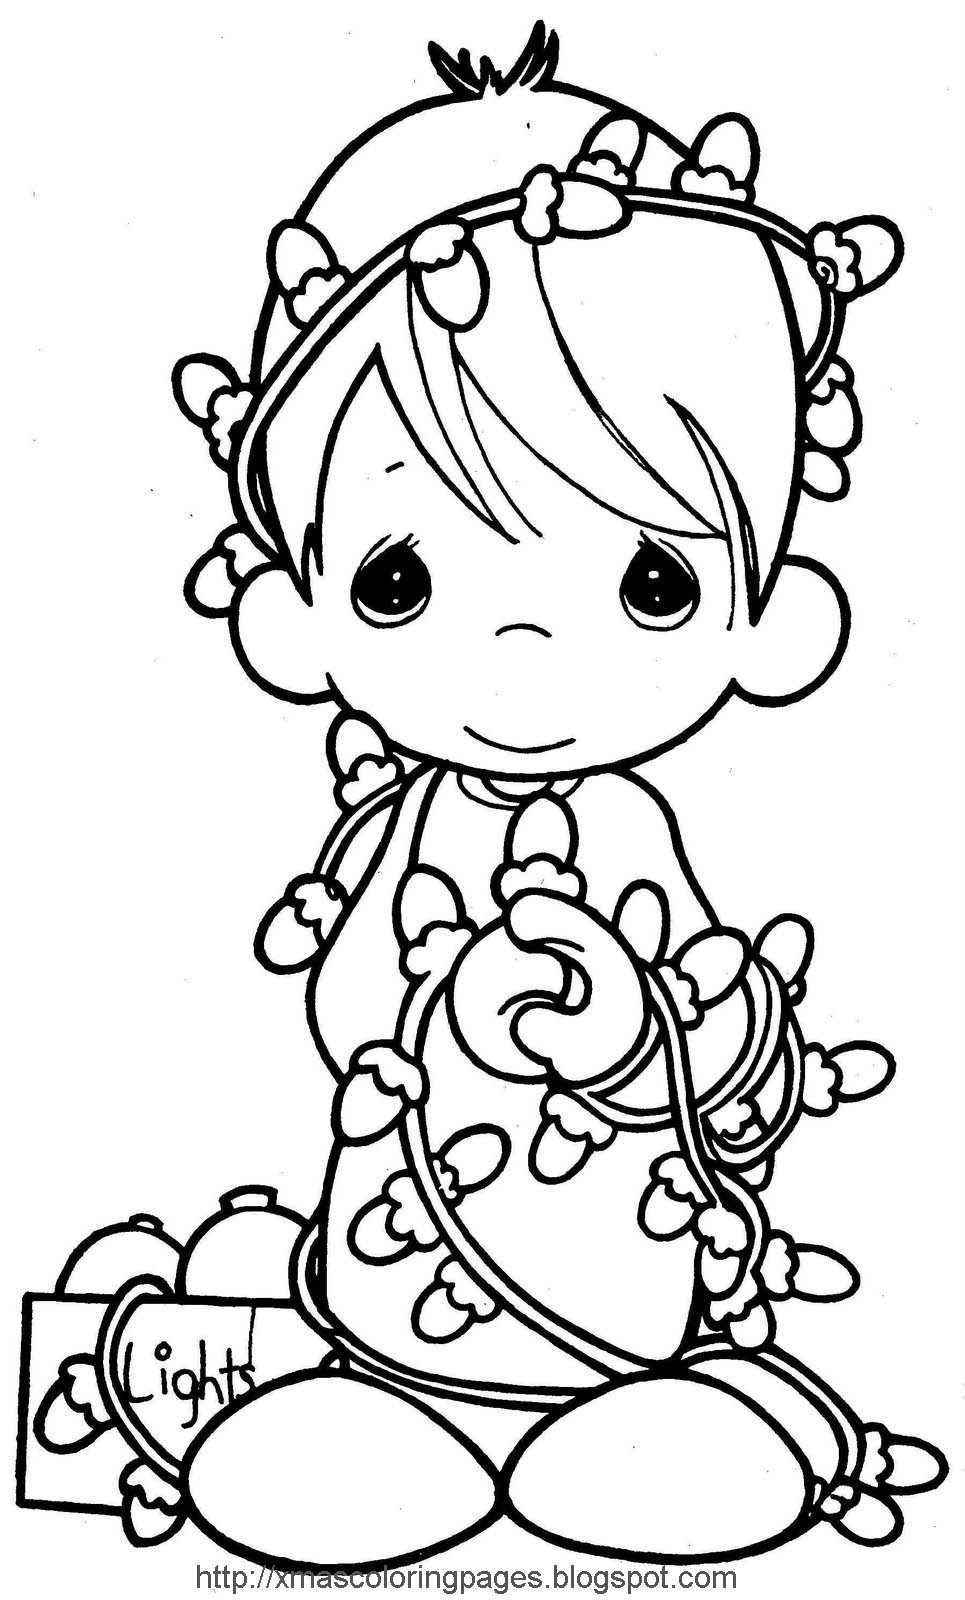 Holiday Coloring Pages Printable
 XMAS COLORING PAGES